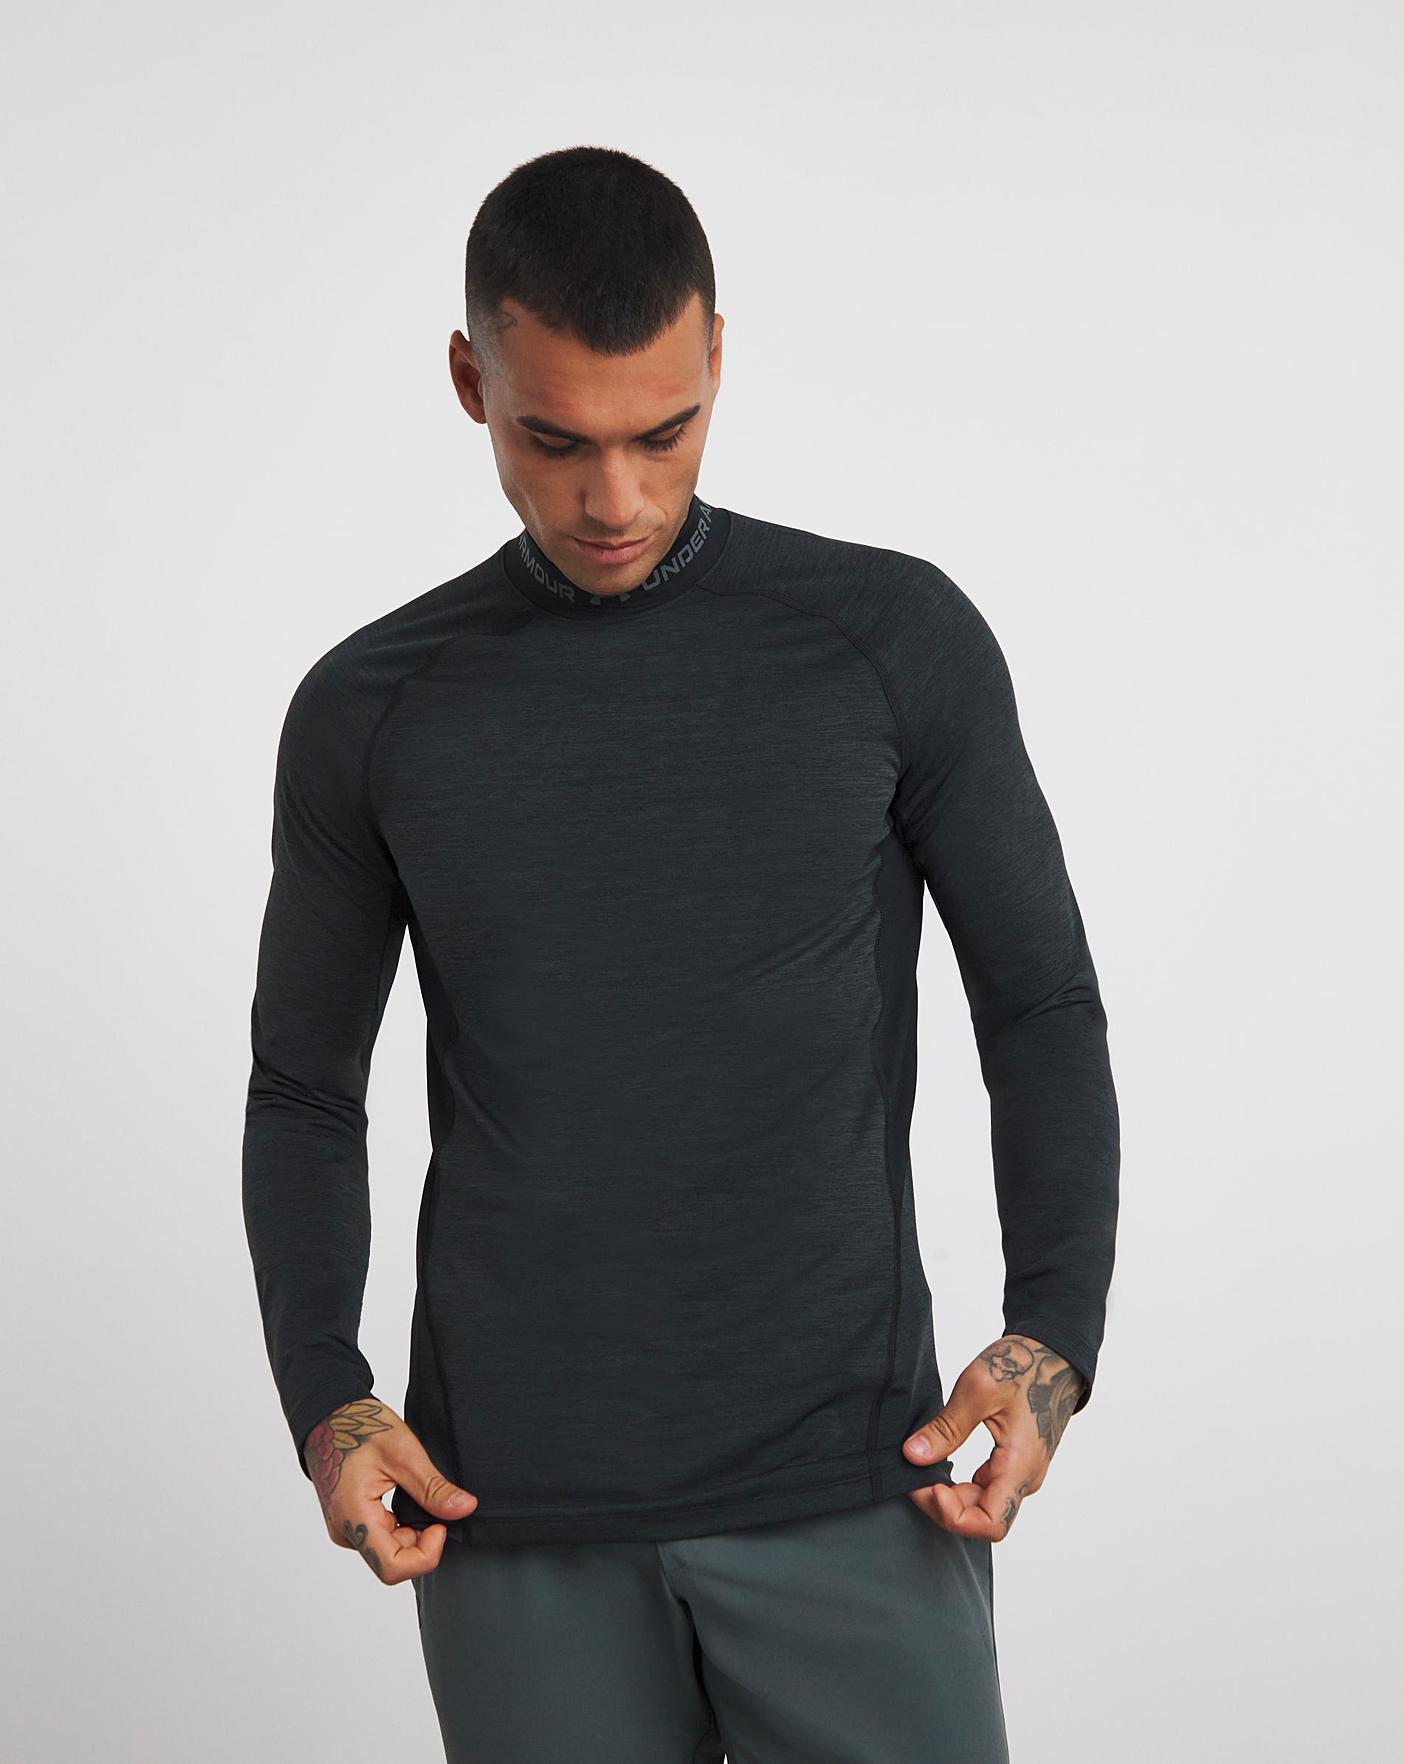 Under Armour mens Dual-layer Fabric With an Ultra-warm, Brushed Interior &  a Smooth, Fast-drying Exterior